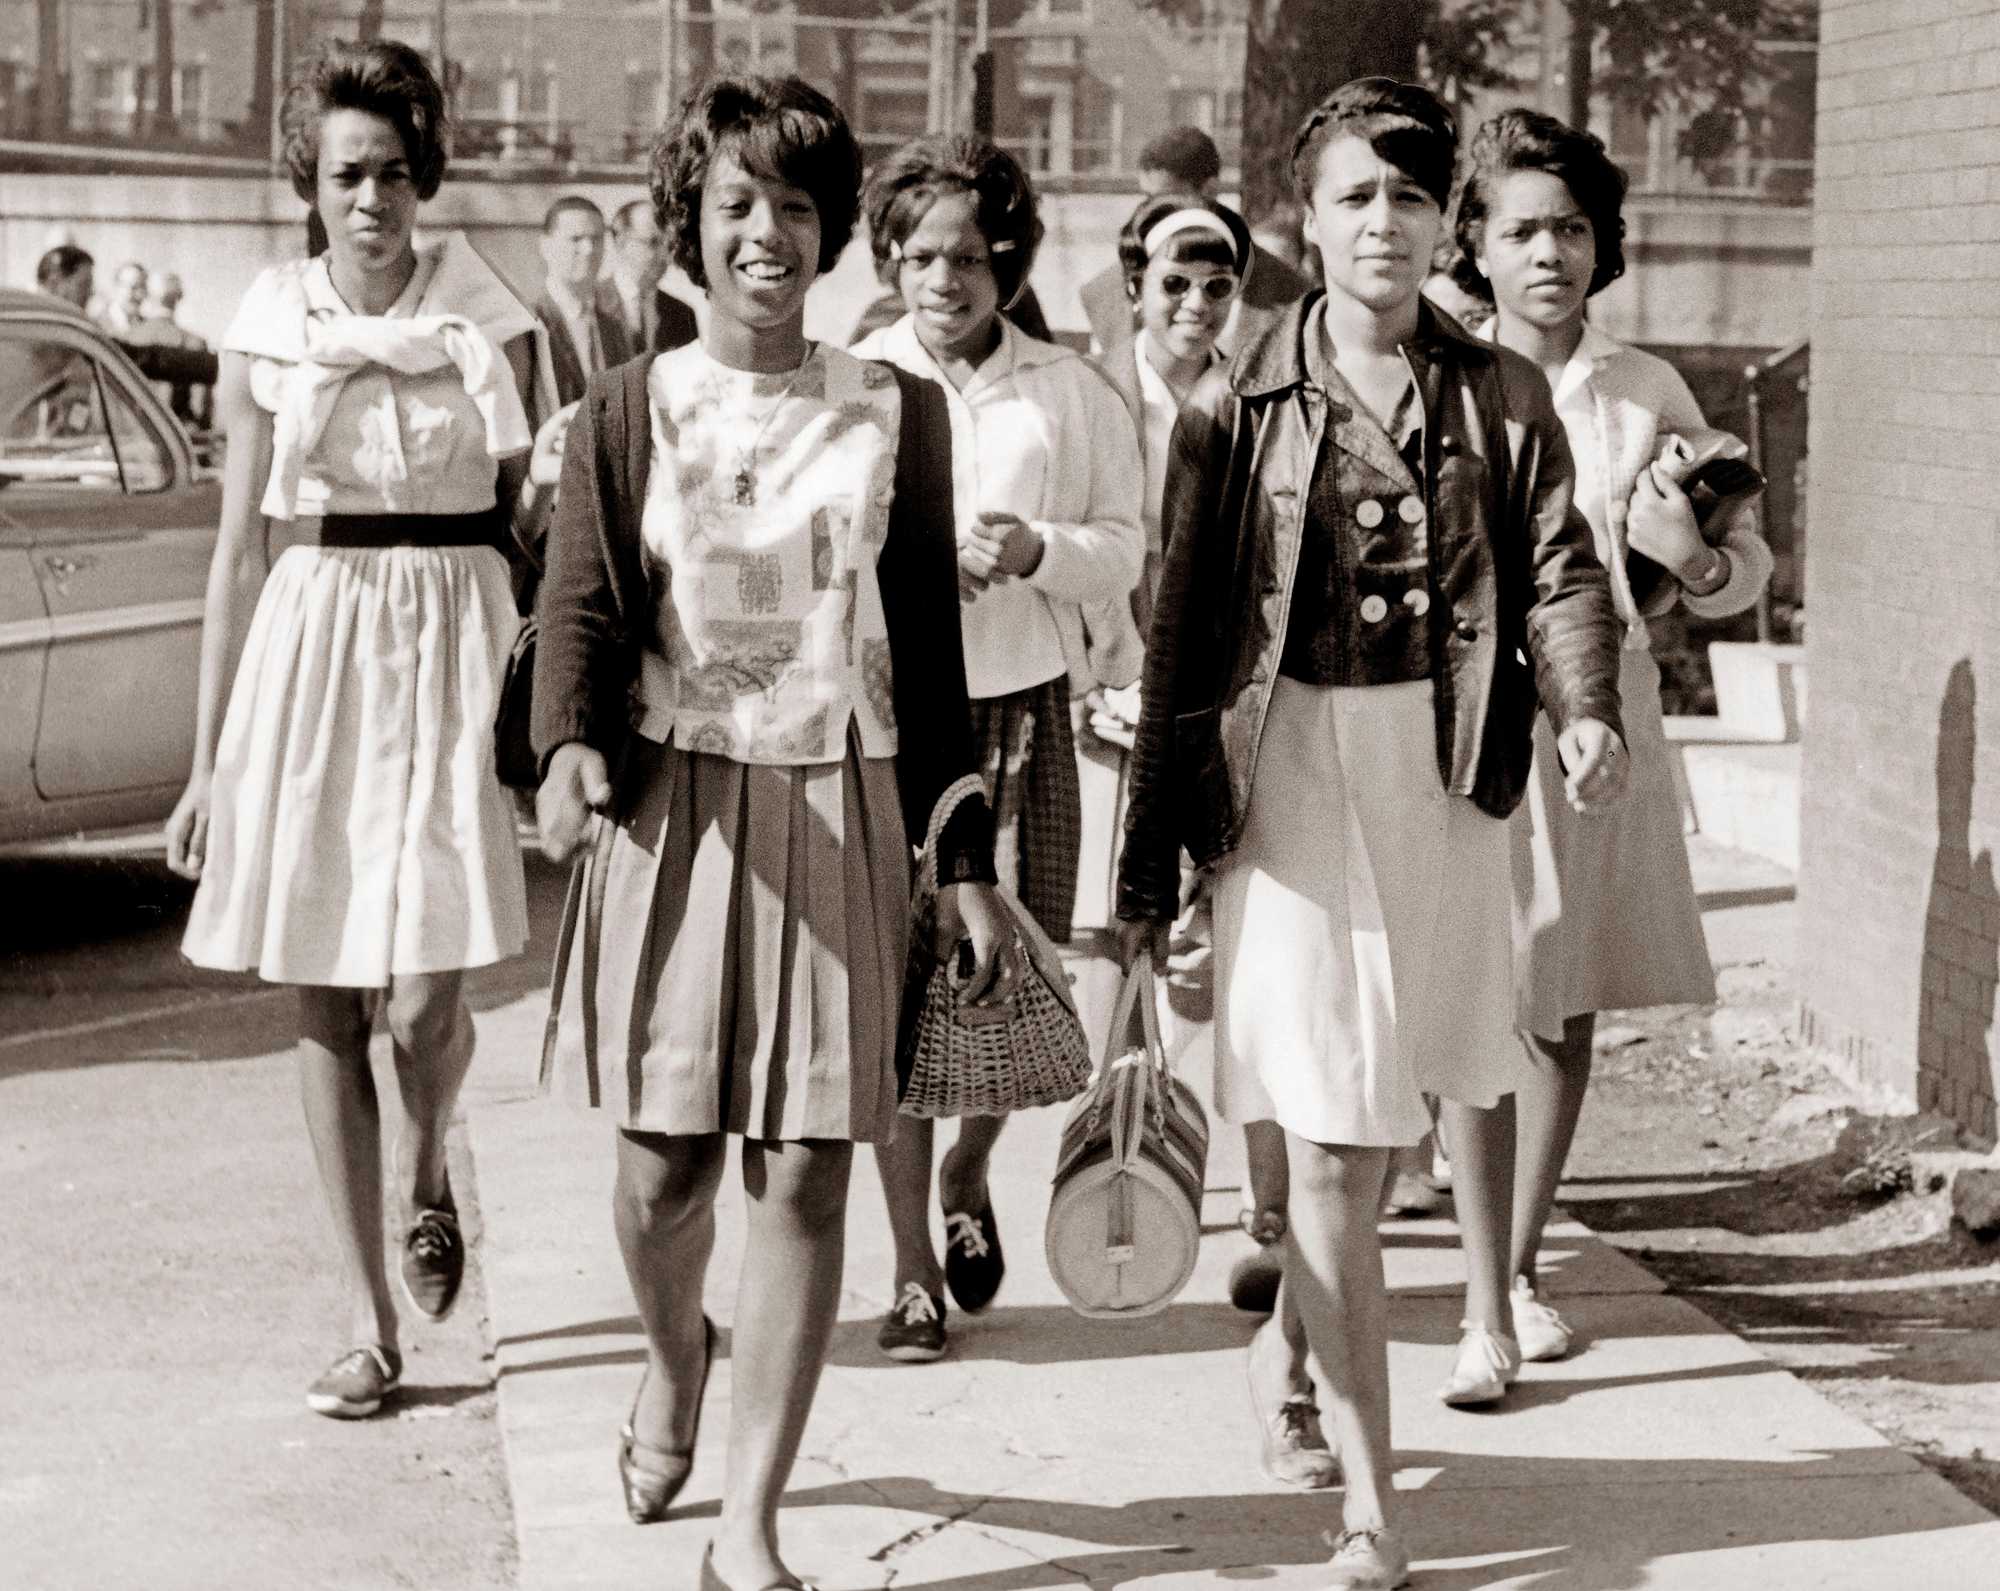 A group of students headed for St. Mark’s Center during a boycott of schools over the issue of segregation on June 18, 1963. (Robert Backoff/Globe Staff)

